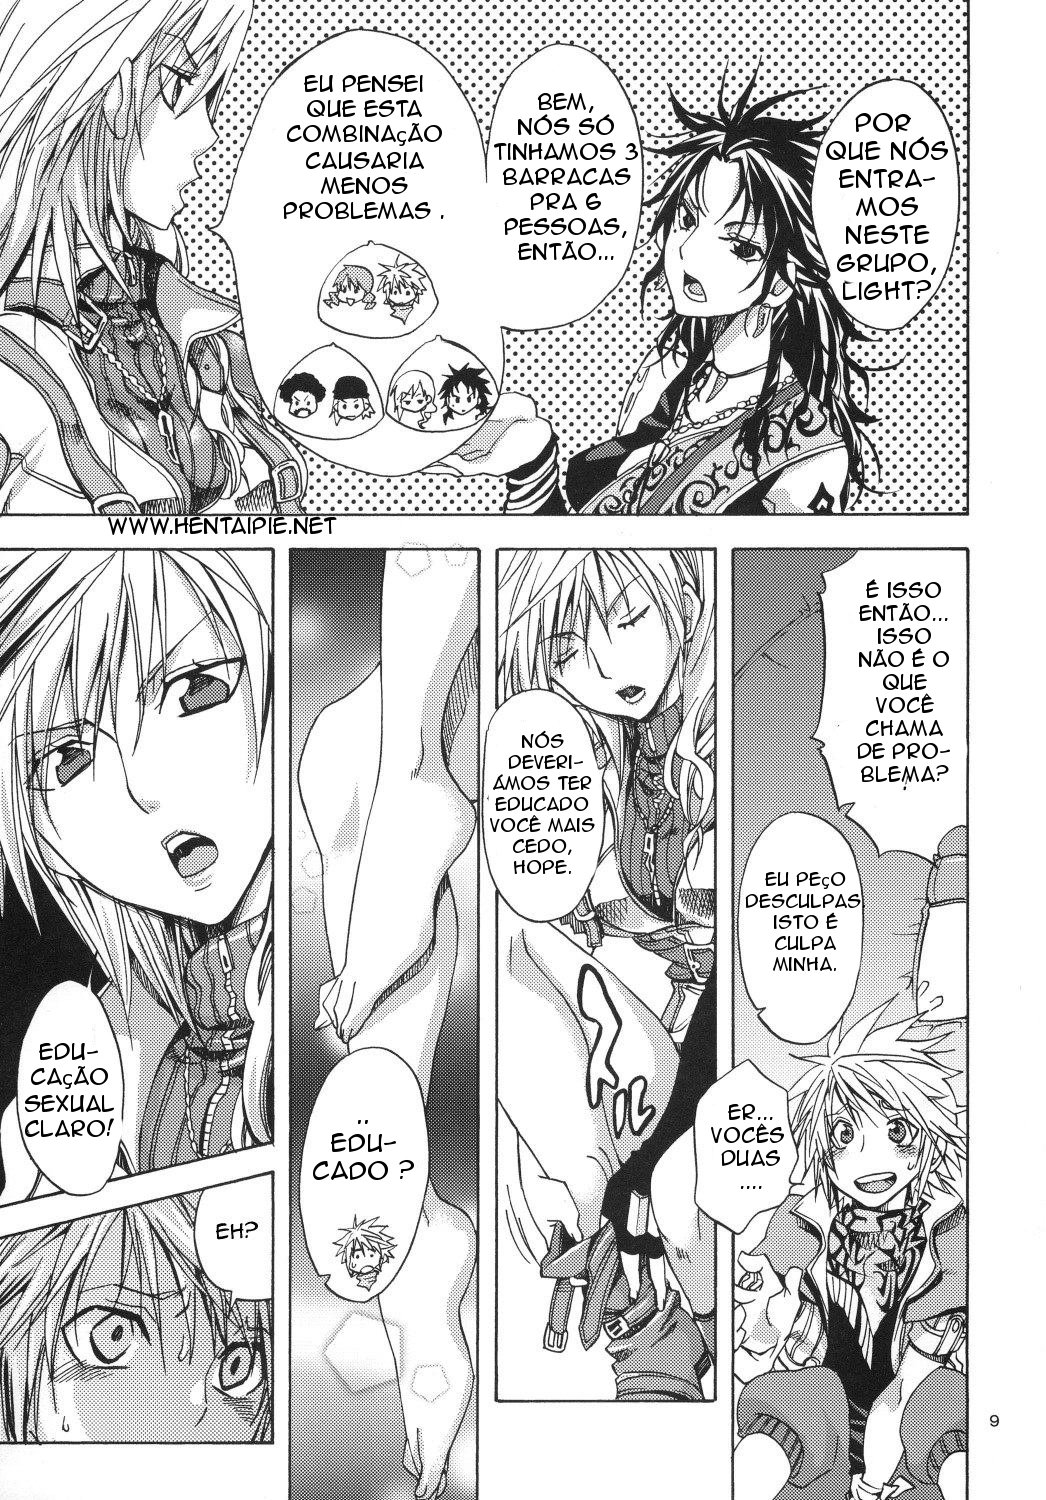 [Kurionesha] On Holiday With L Cie and Friends (Final Fantasy XIII)[Portuguese] 